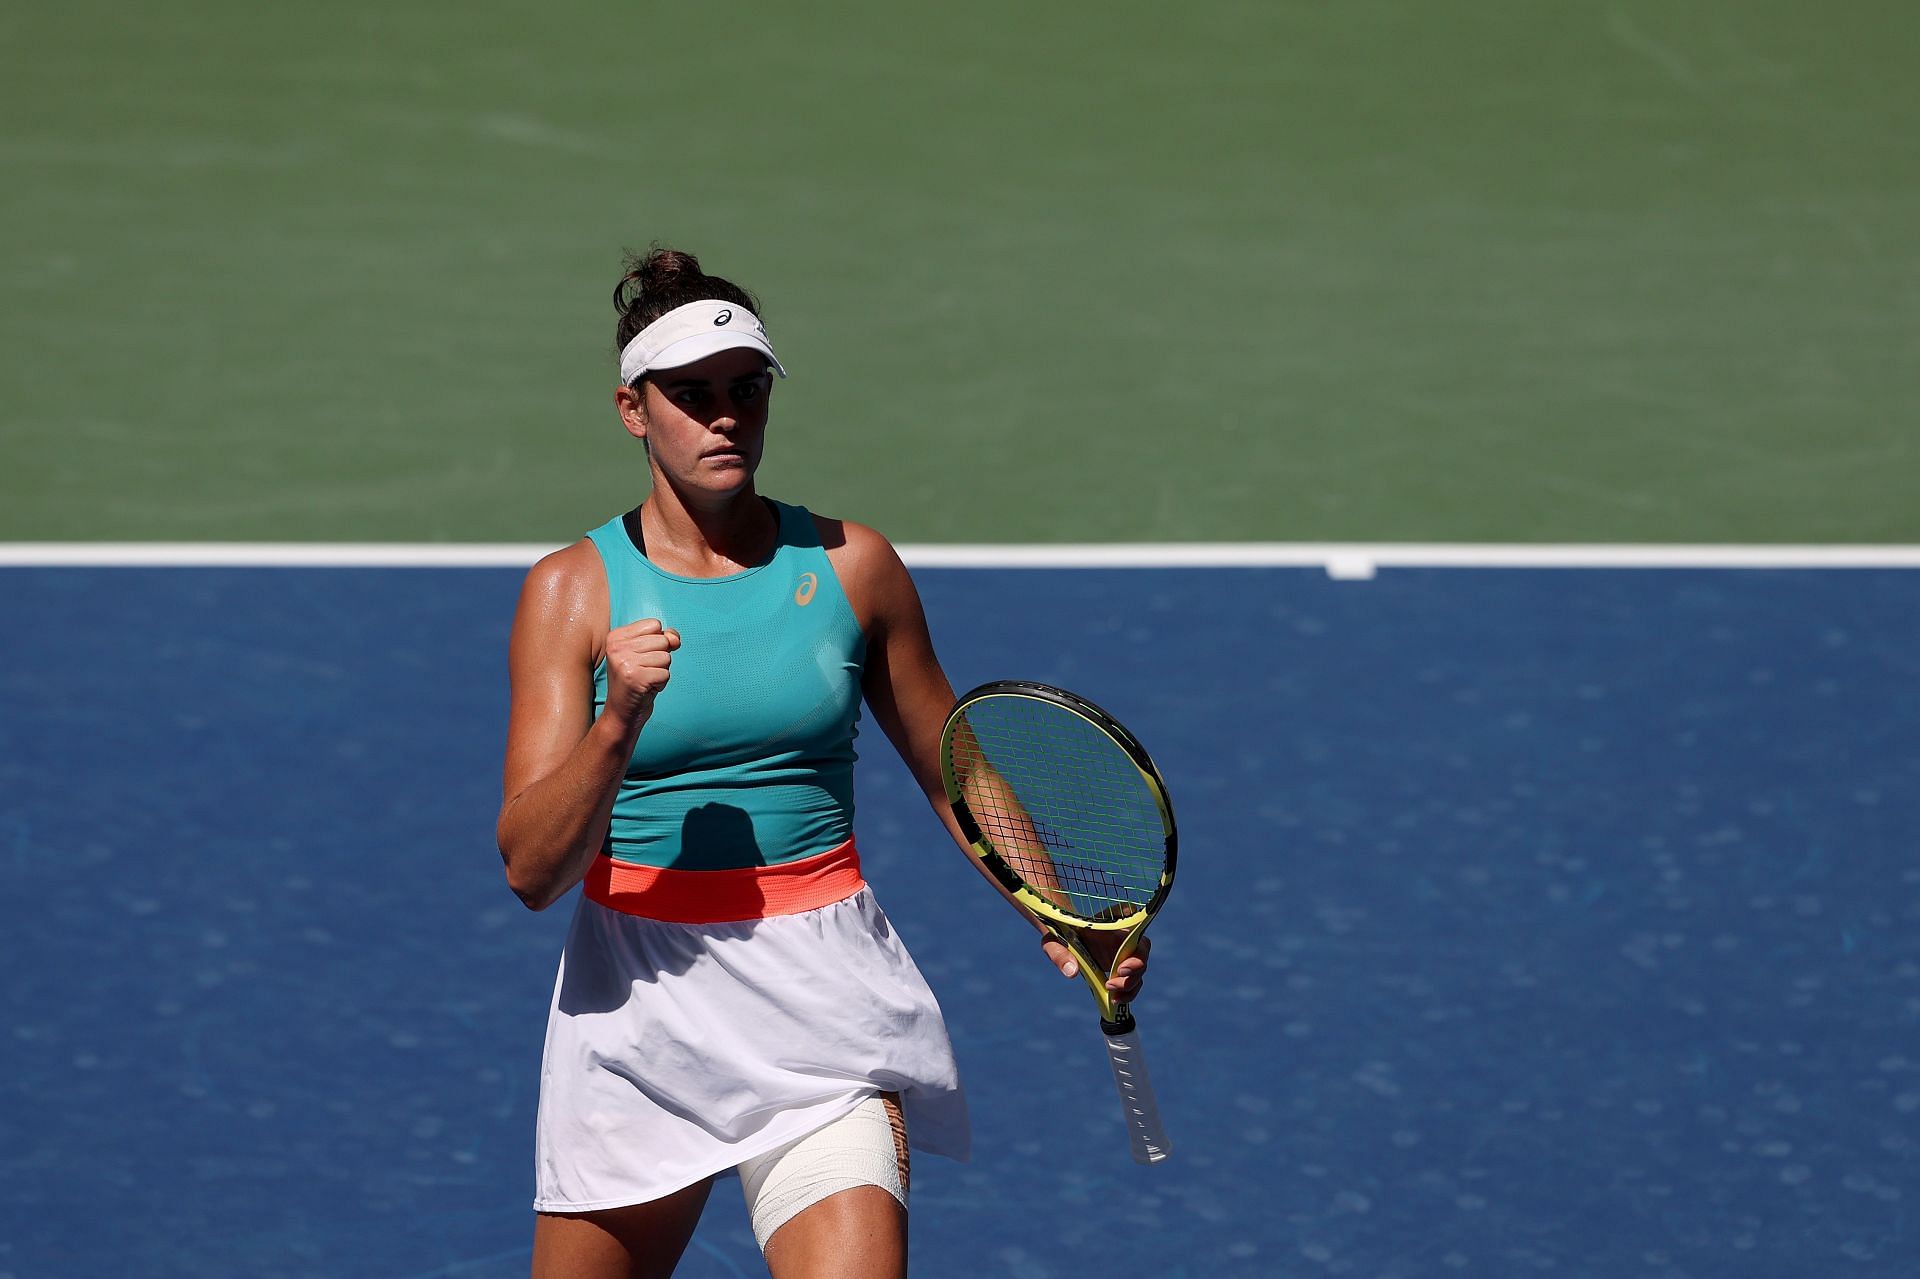 US Open 2023 releases main draw, featuring Jennifer Brady via special